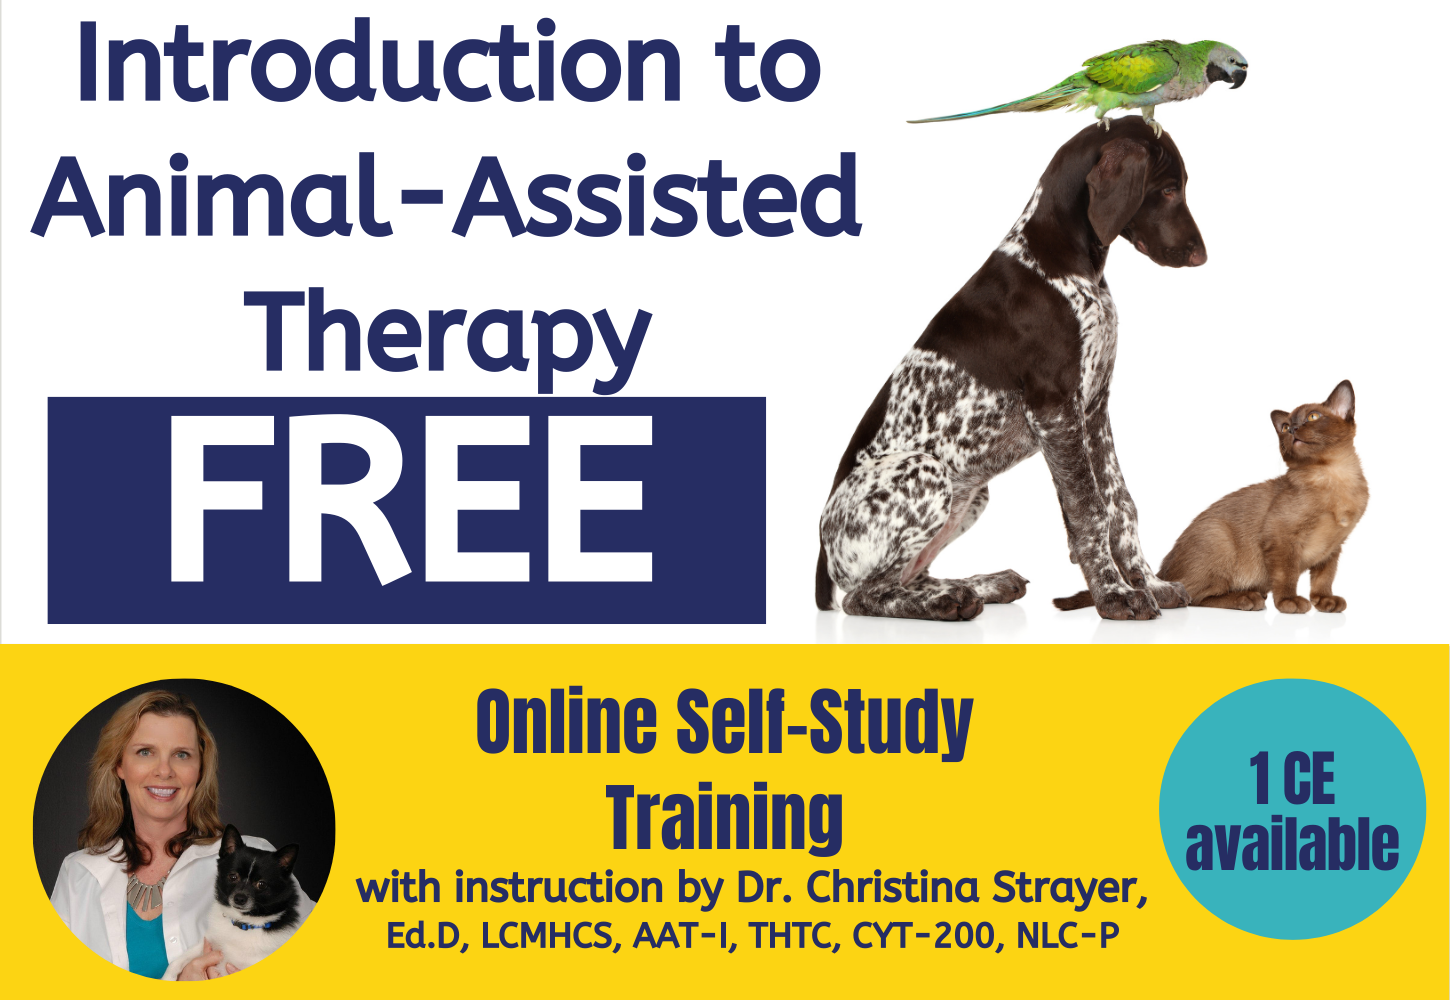 Introduction to Animal-Assisted Therapy